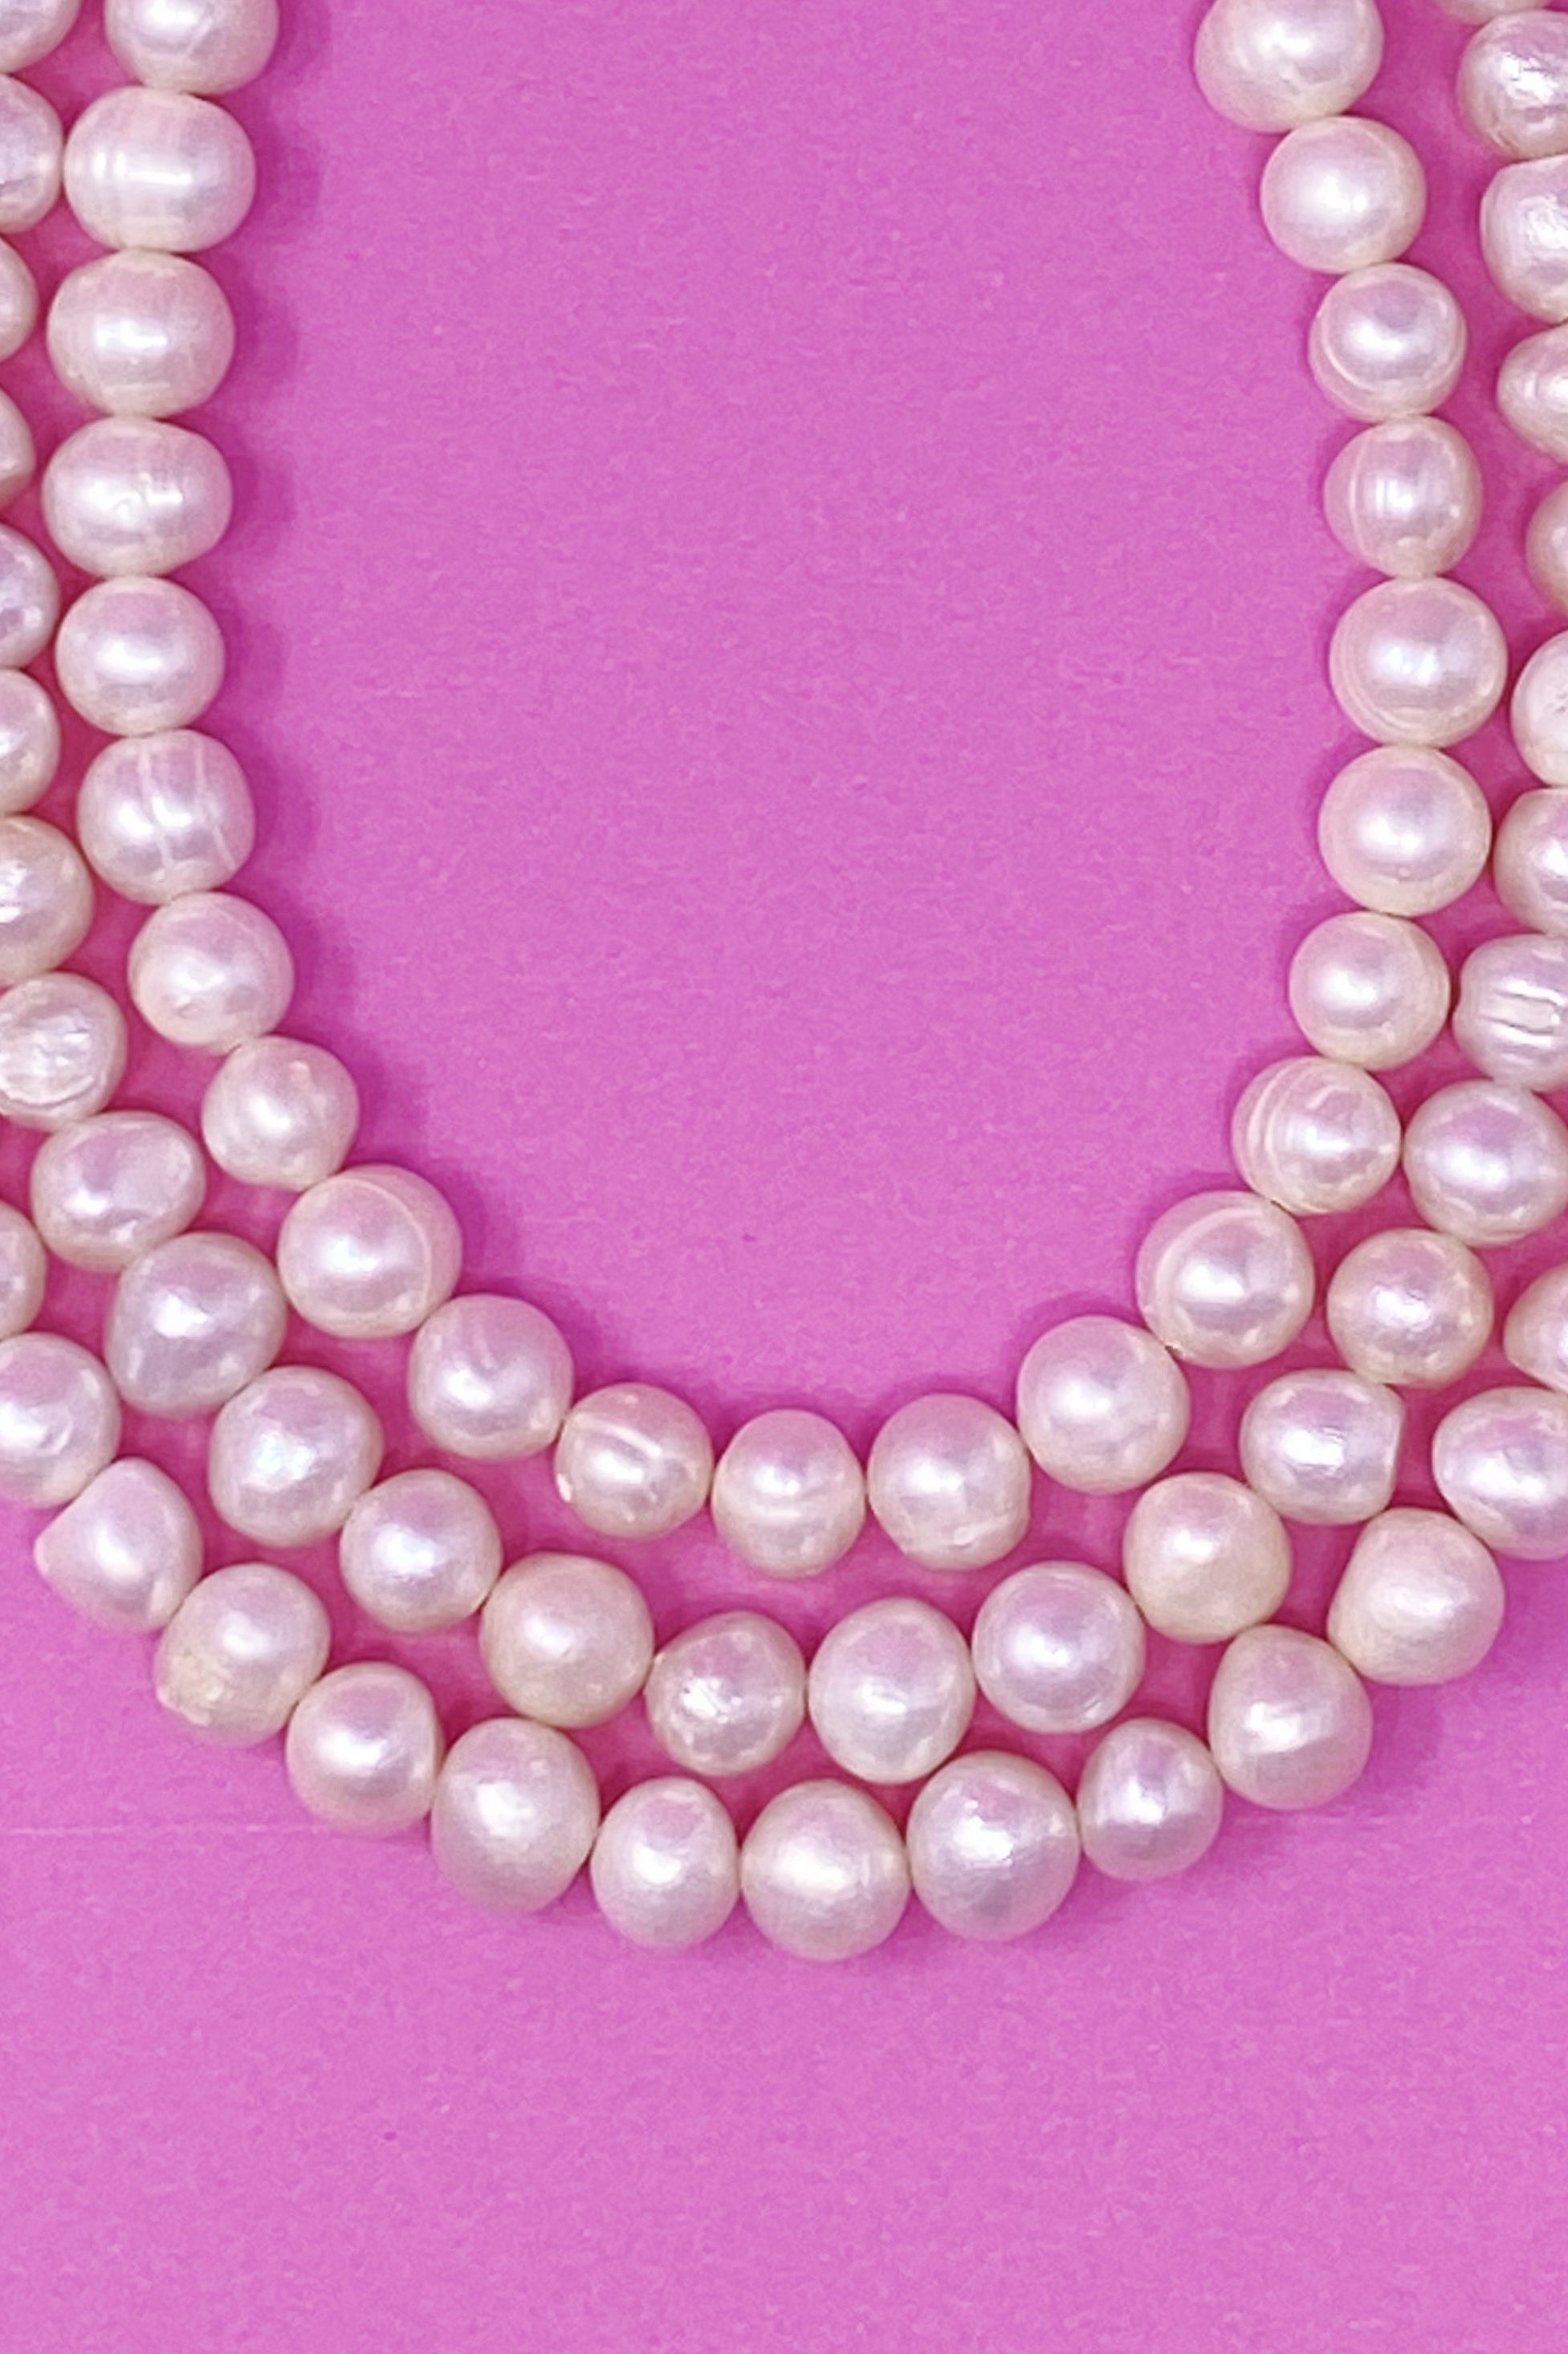 Three Strands Freshwater Pearl Necklace Ellisonyoung.com